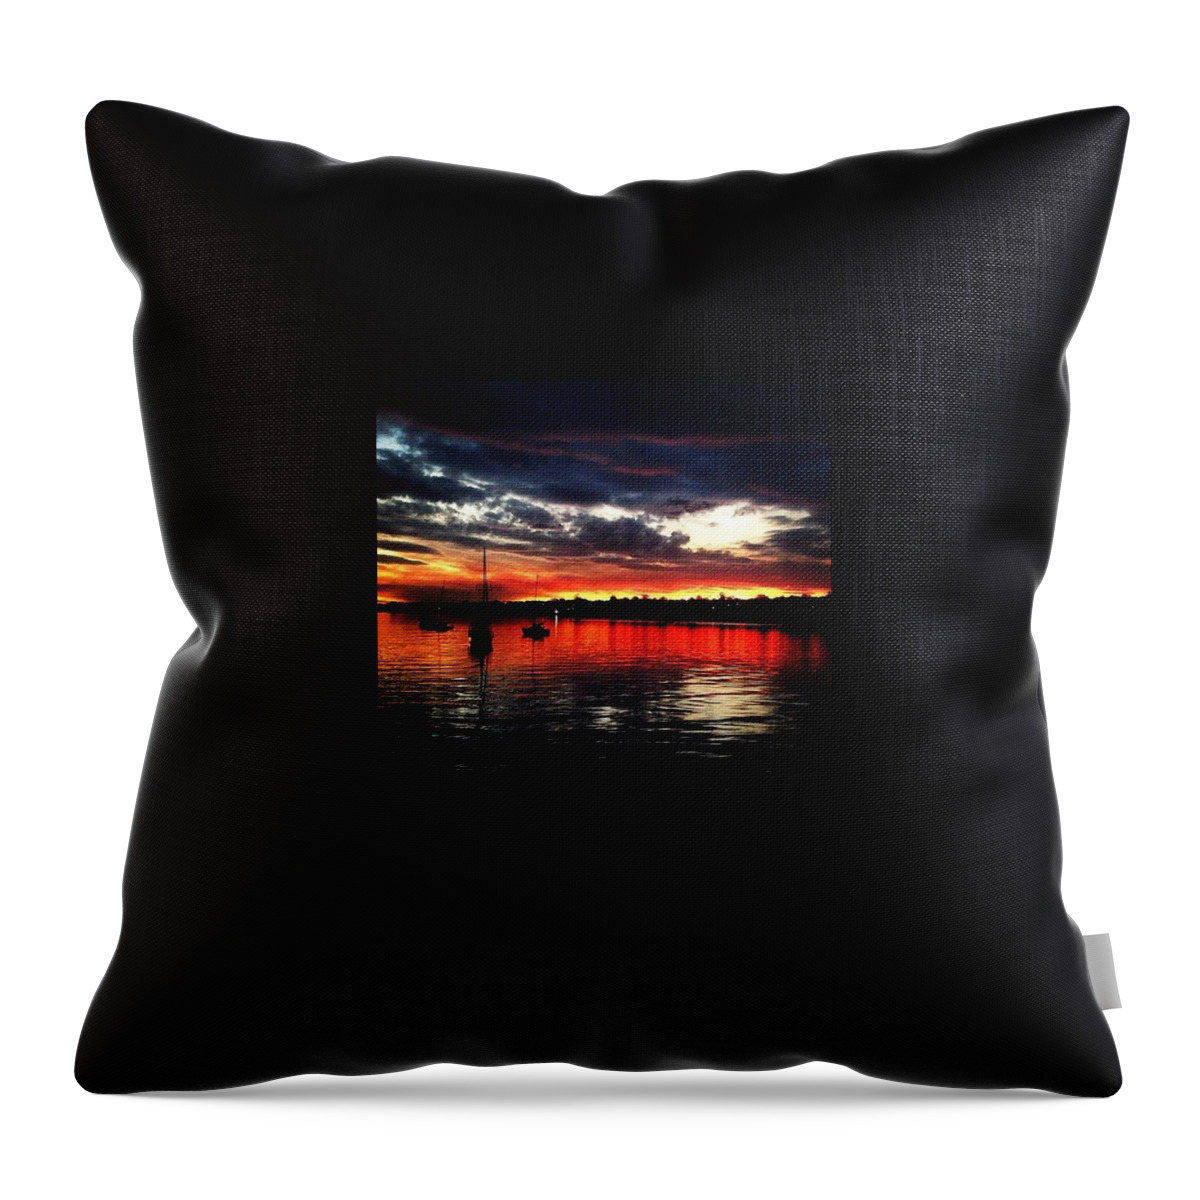 Landscape Throw Pillow featuring the photograph Bay Run Beauty by Nic Westaway